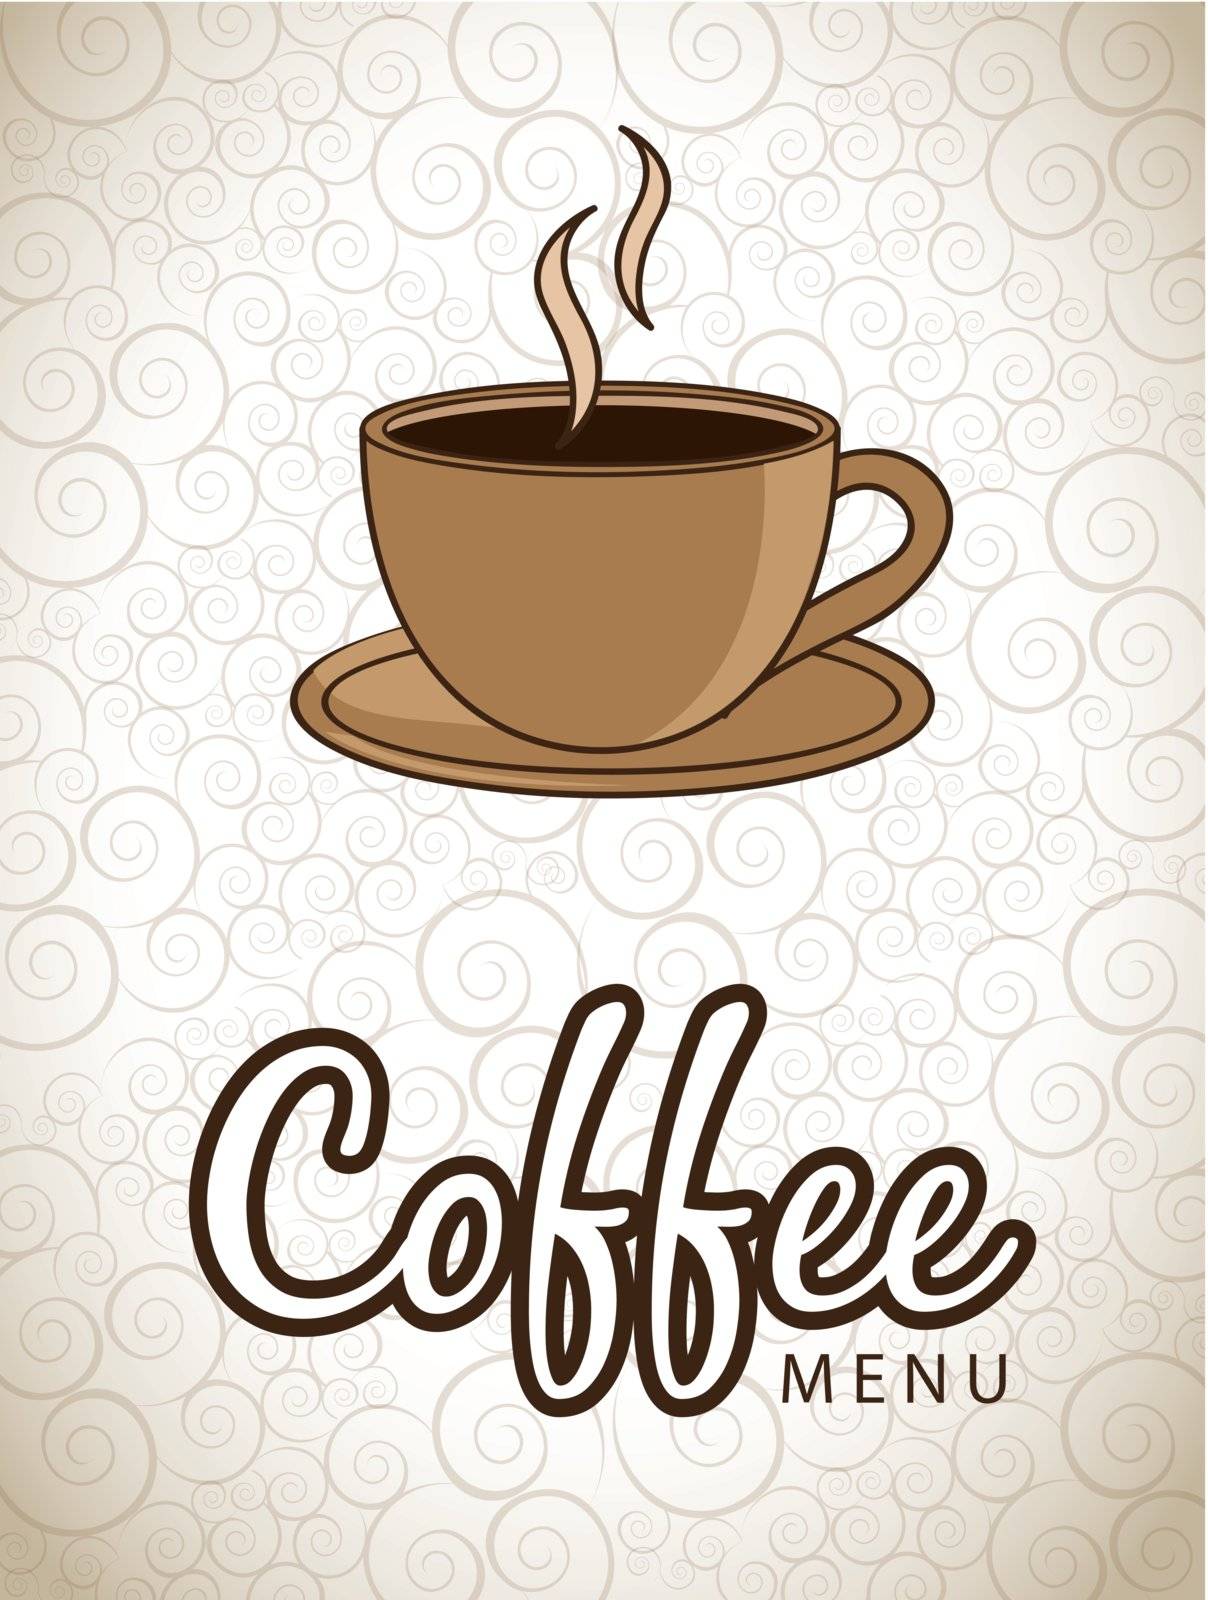 Hot cup of coffee over vintage background vector illustration